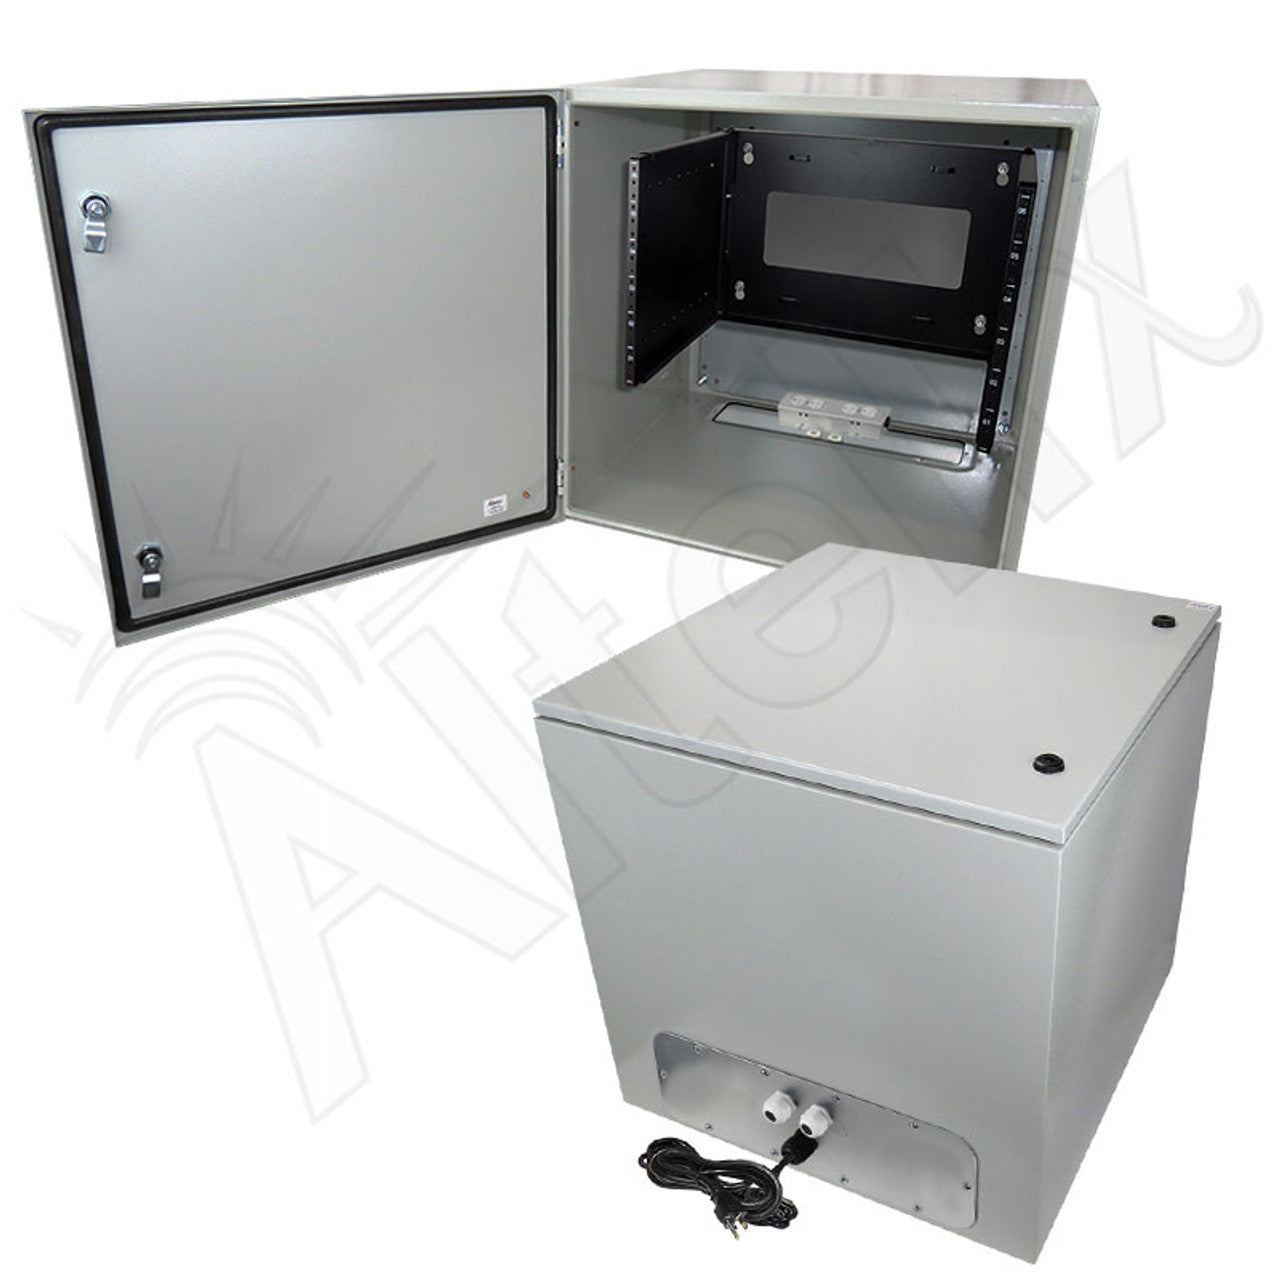 Altelix 120VAC 20A Steel NEMA 4X Enclosure for UPS Power Systems with 19" Wide 6U Rack, 20A Power Outlets and Power Cord